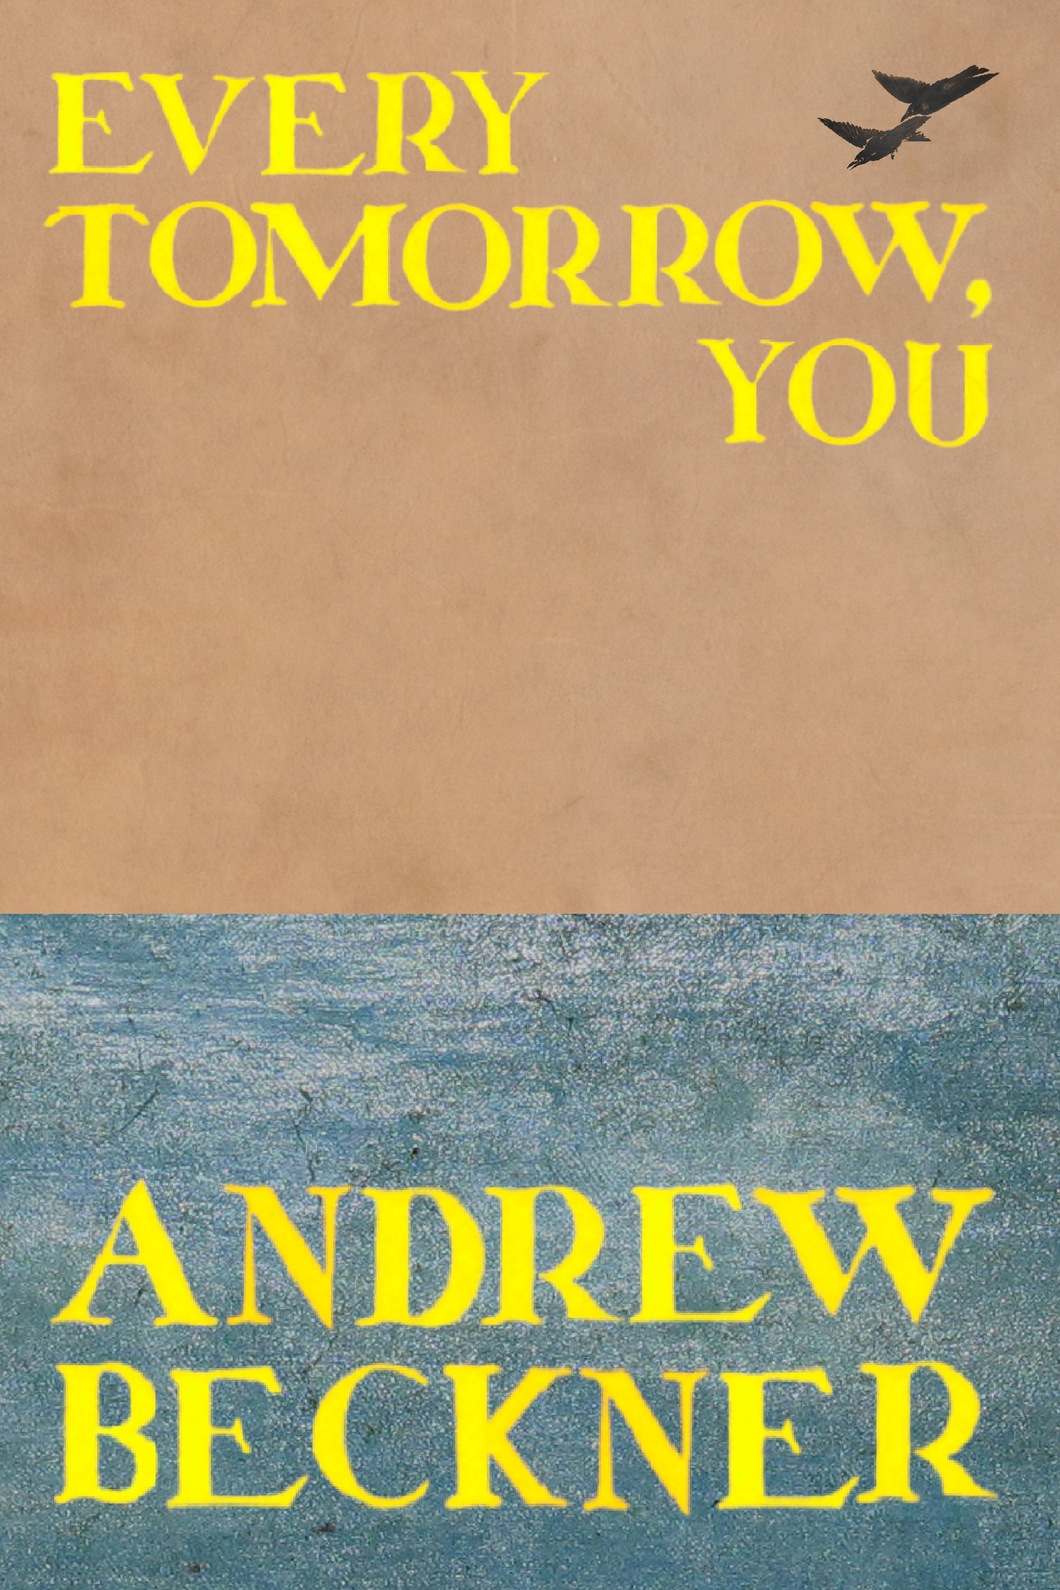 Every Tomorrow, You, by Andrew Beckner-Print Books-Bottlecap Press